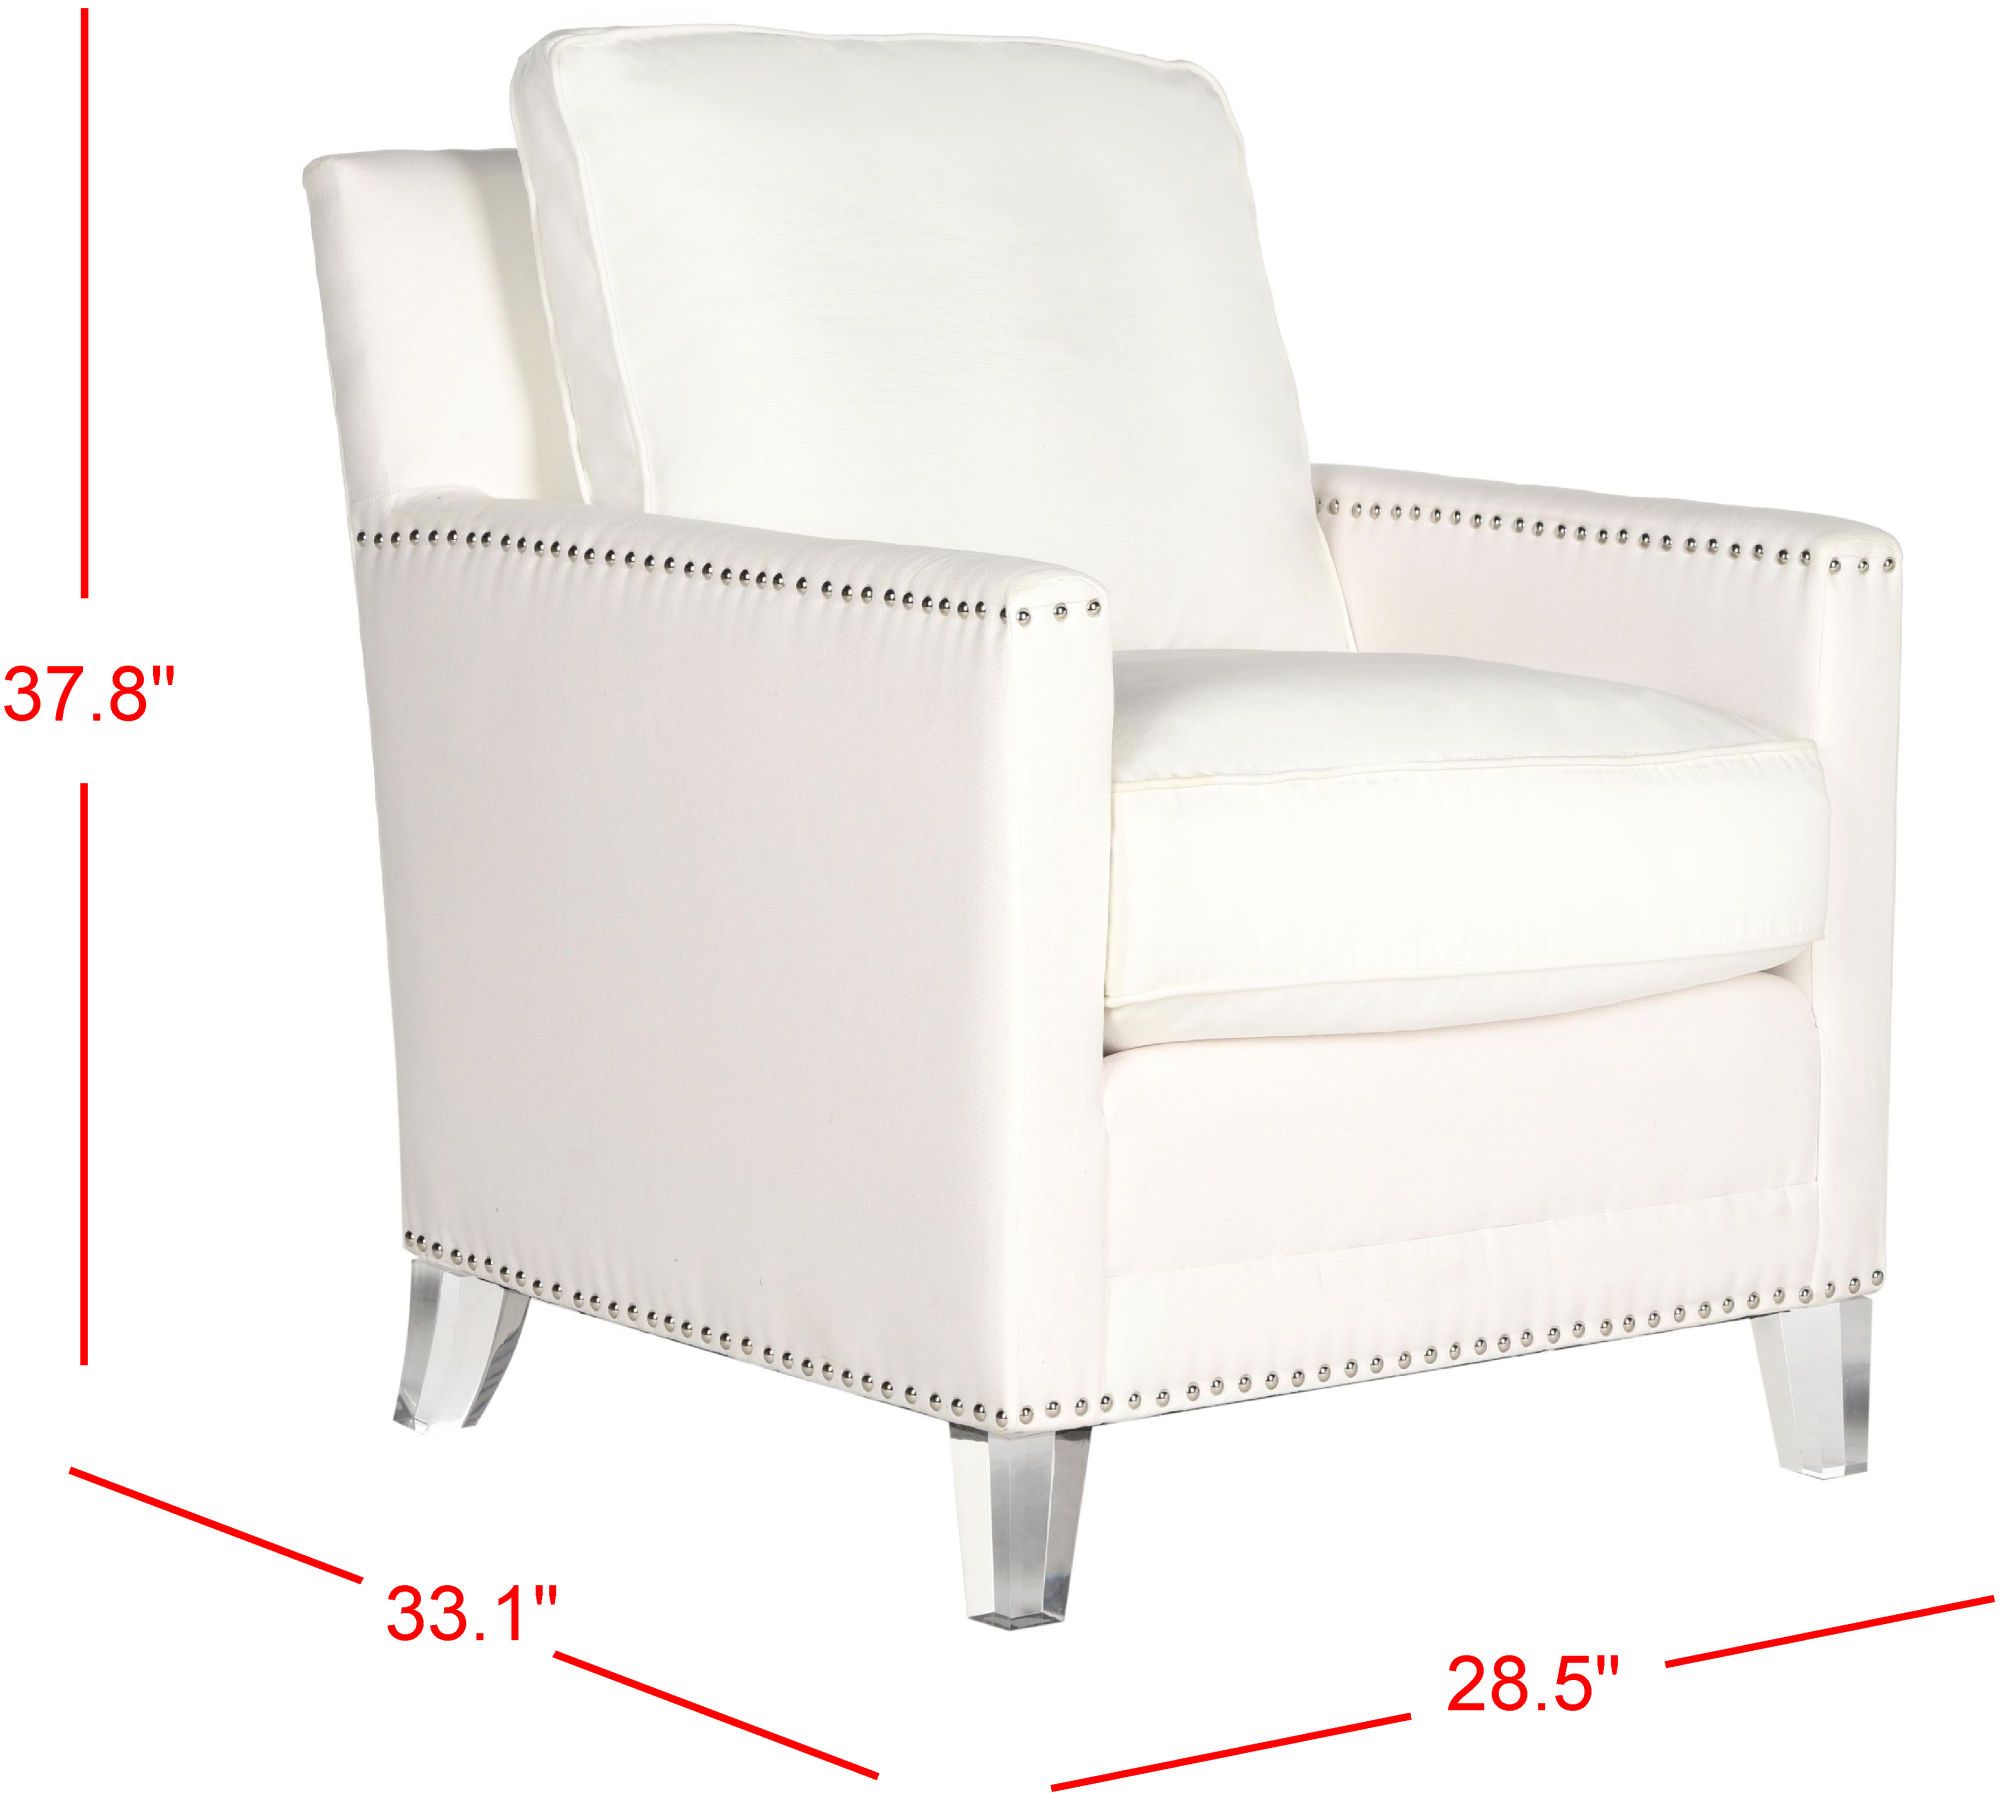 1 Hollywood Glam Tufted Acrylic White Club Chair W/ Silver Nail Heads Intended For White And Clear Acrylic Tufted Vanity Stools (View 19 of 20)